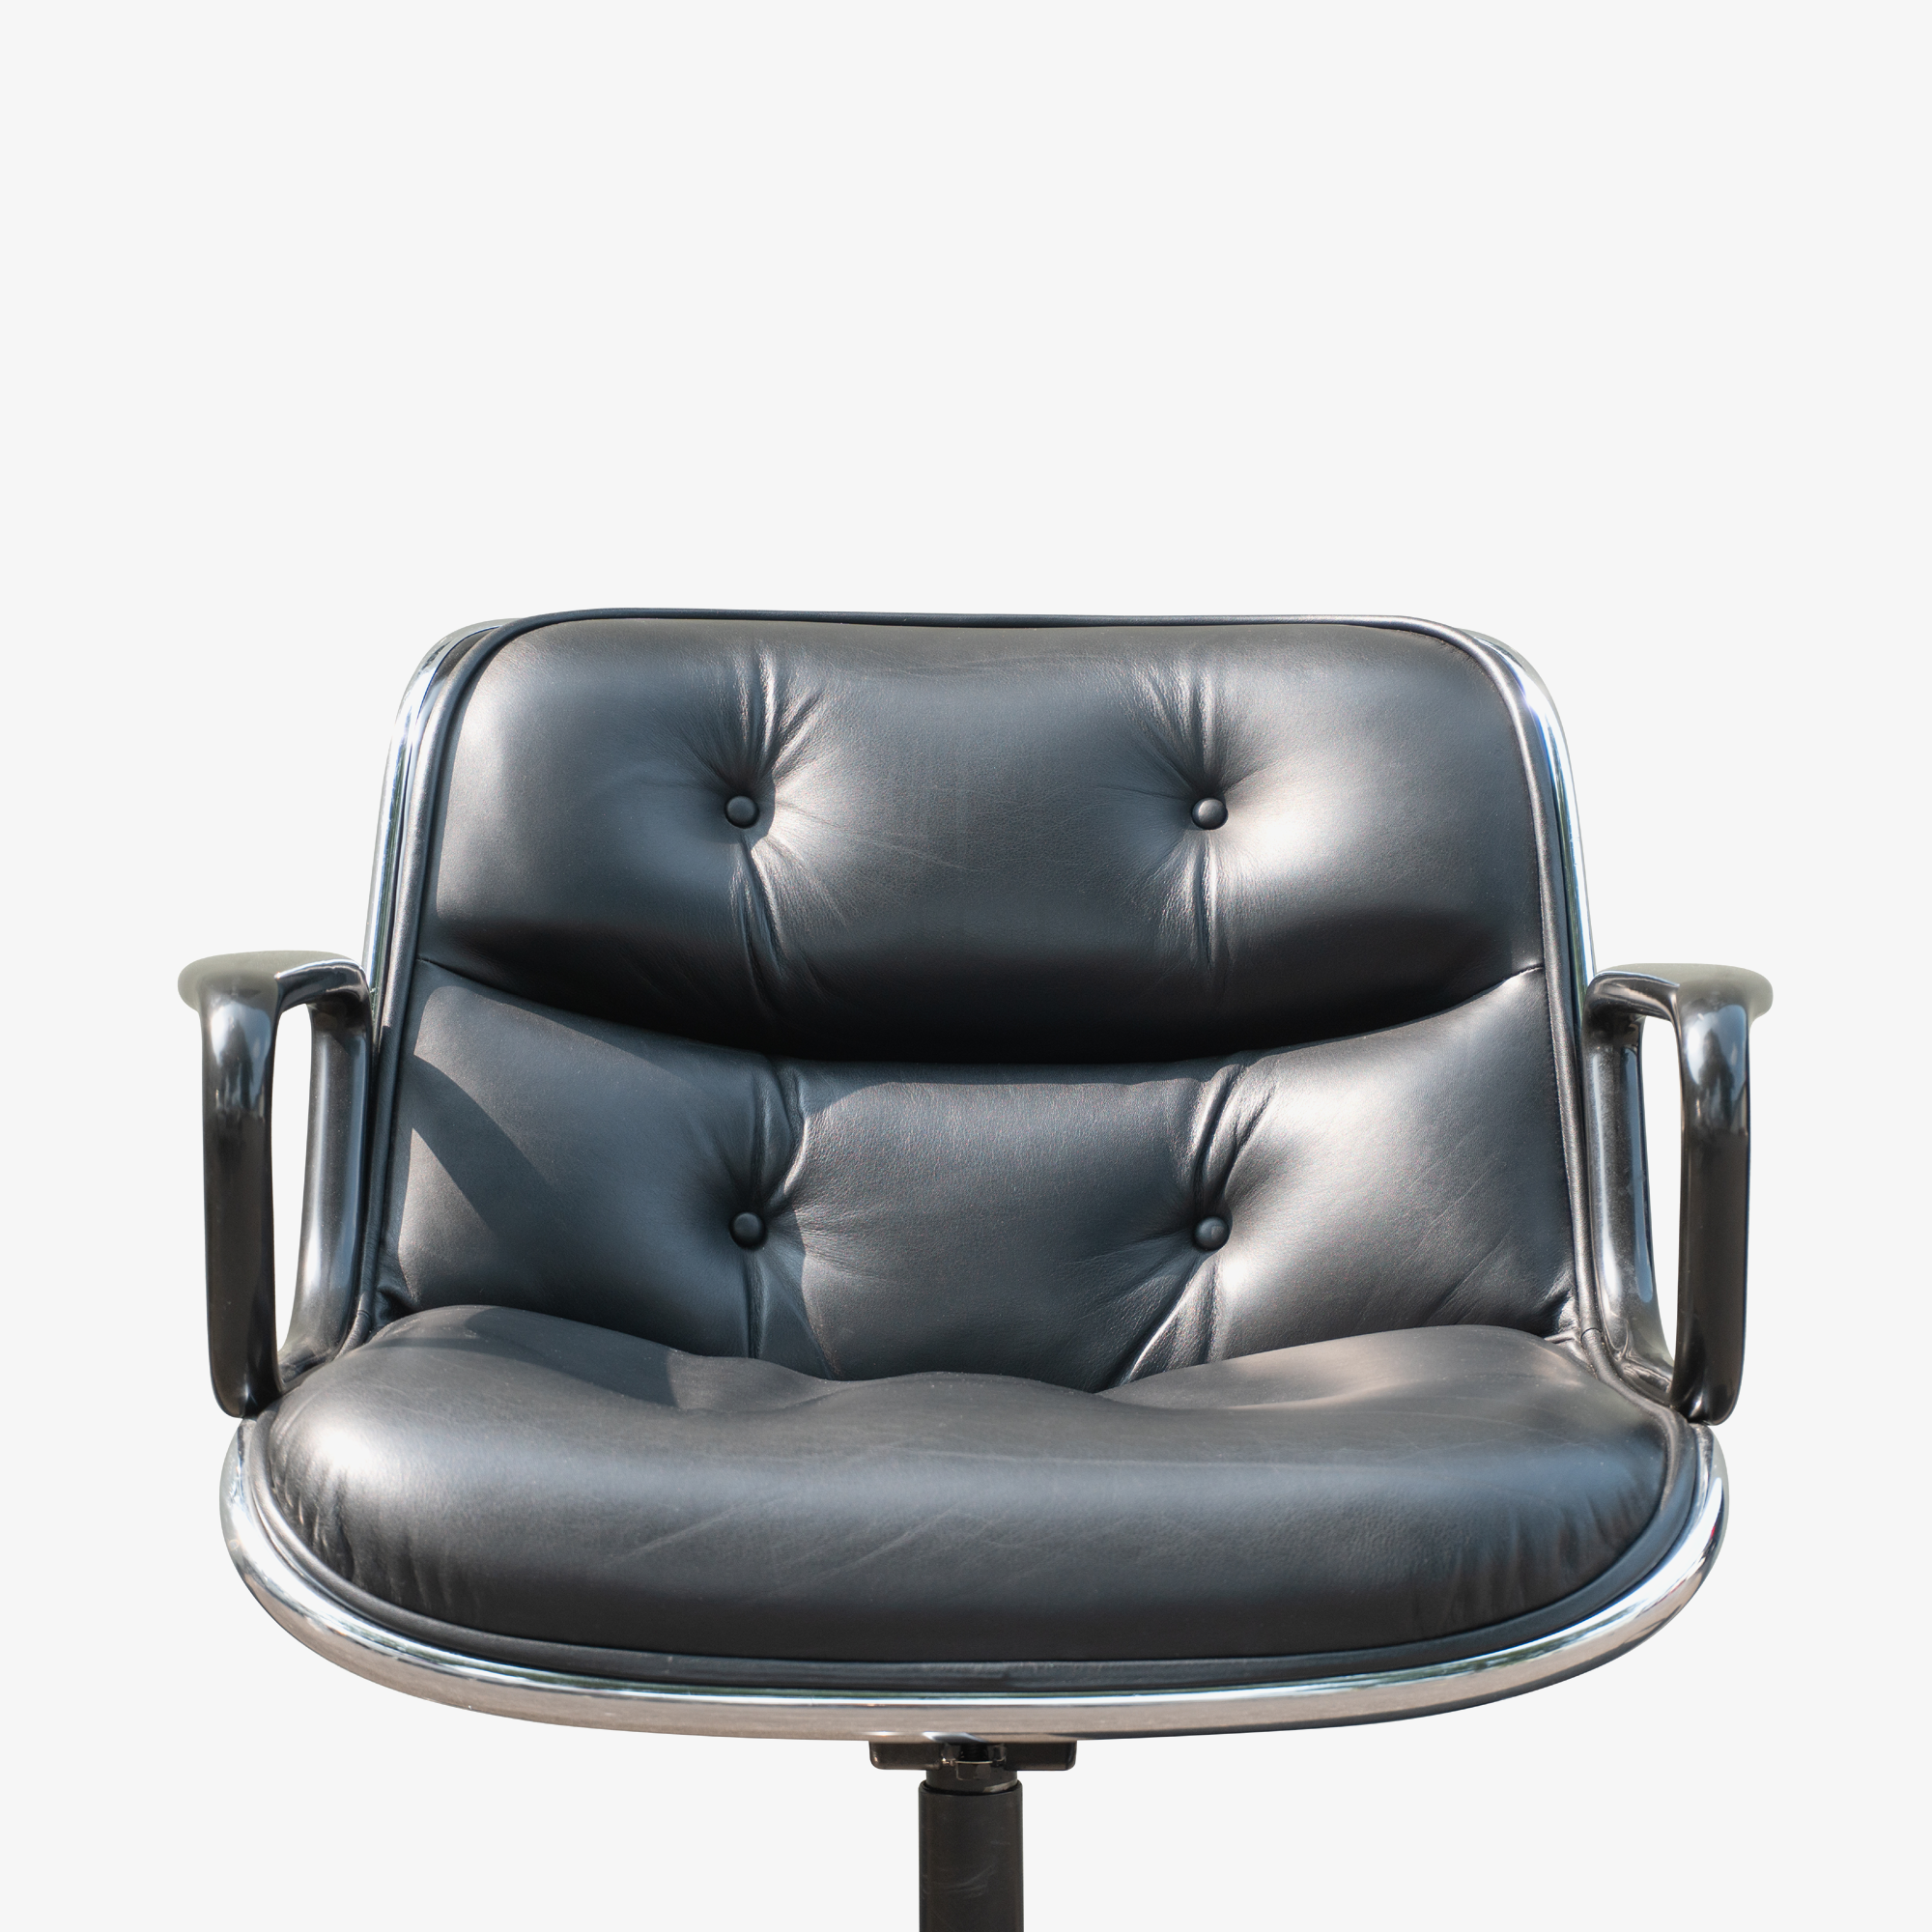 Pollock Executive Chair in Black Leather by Charles Pollock for Knoll - Square5.png